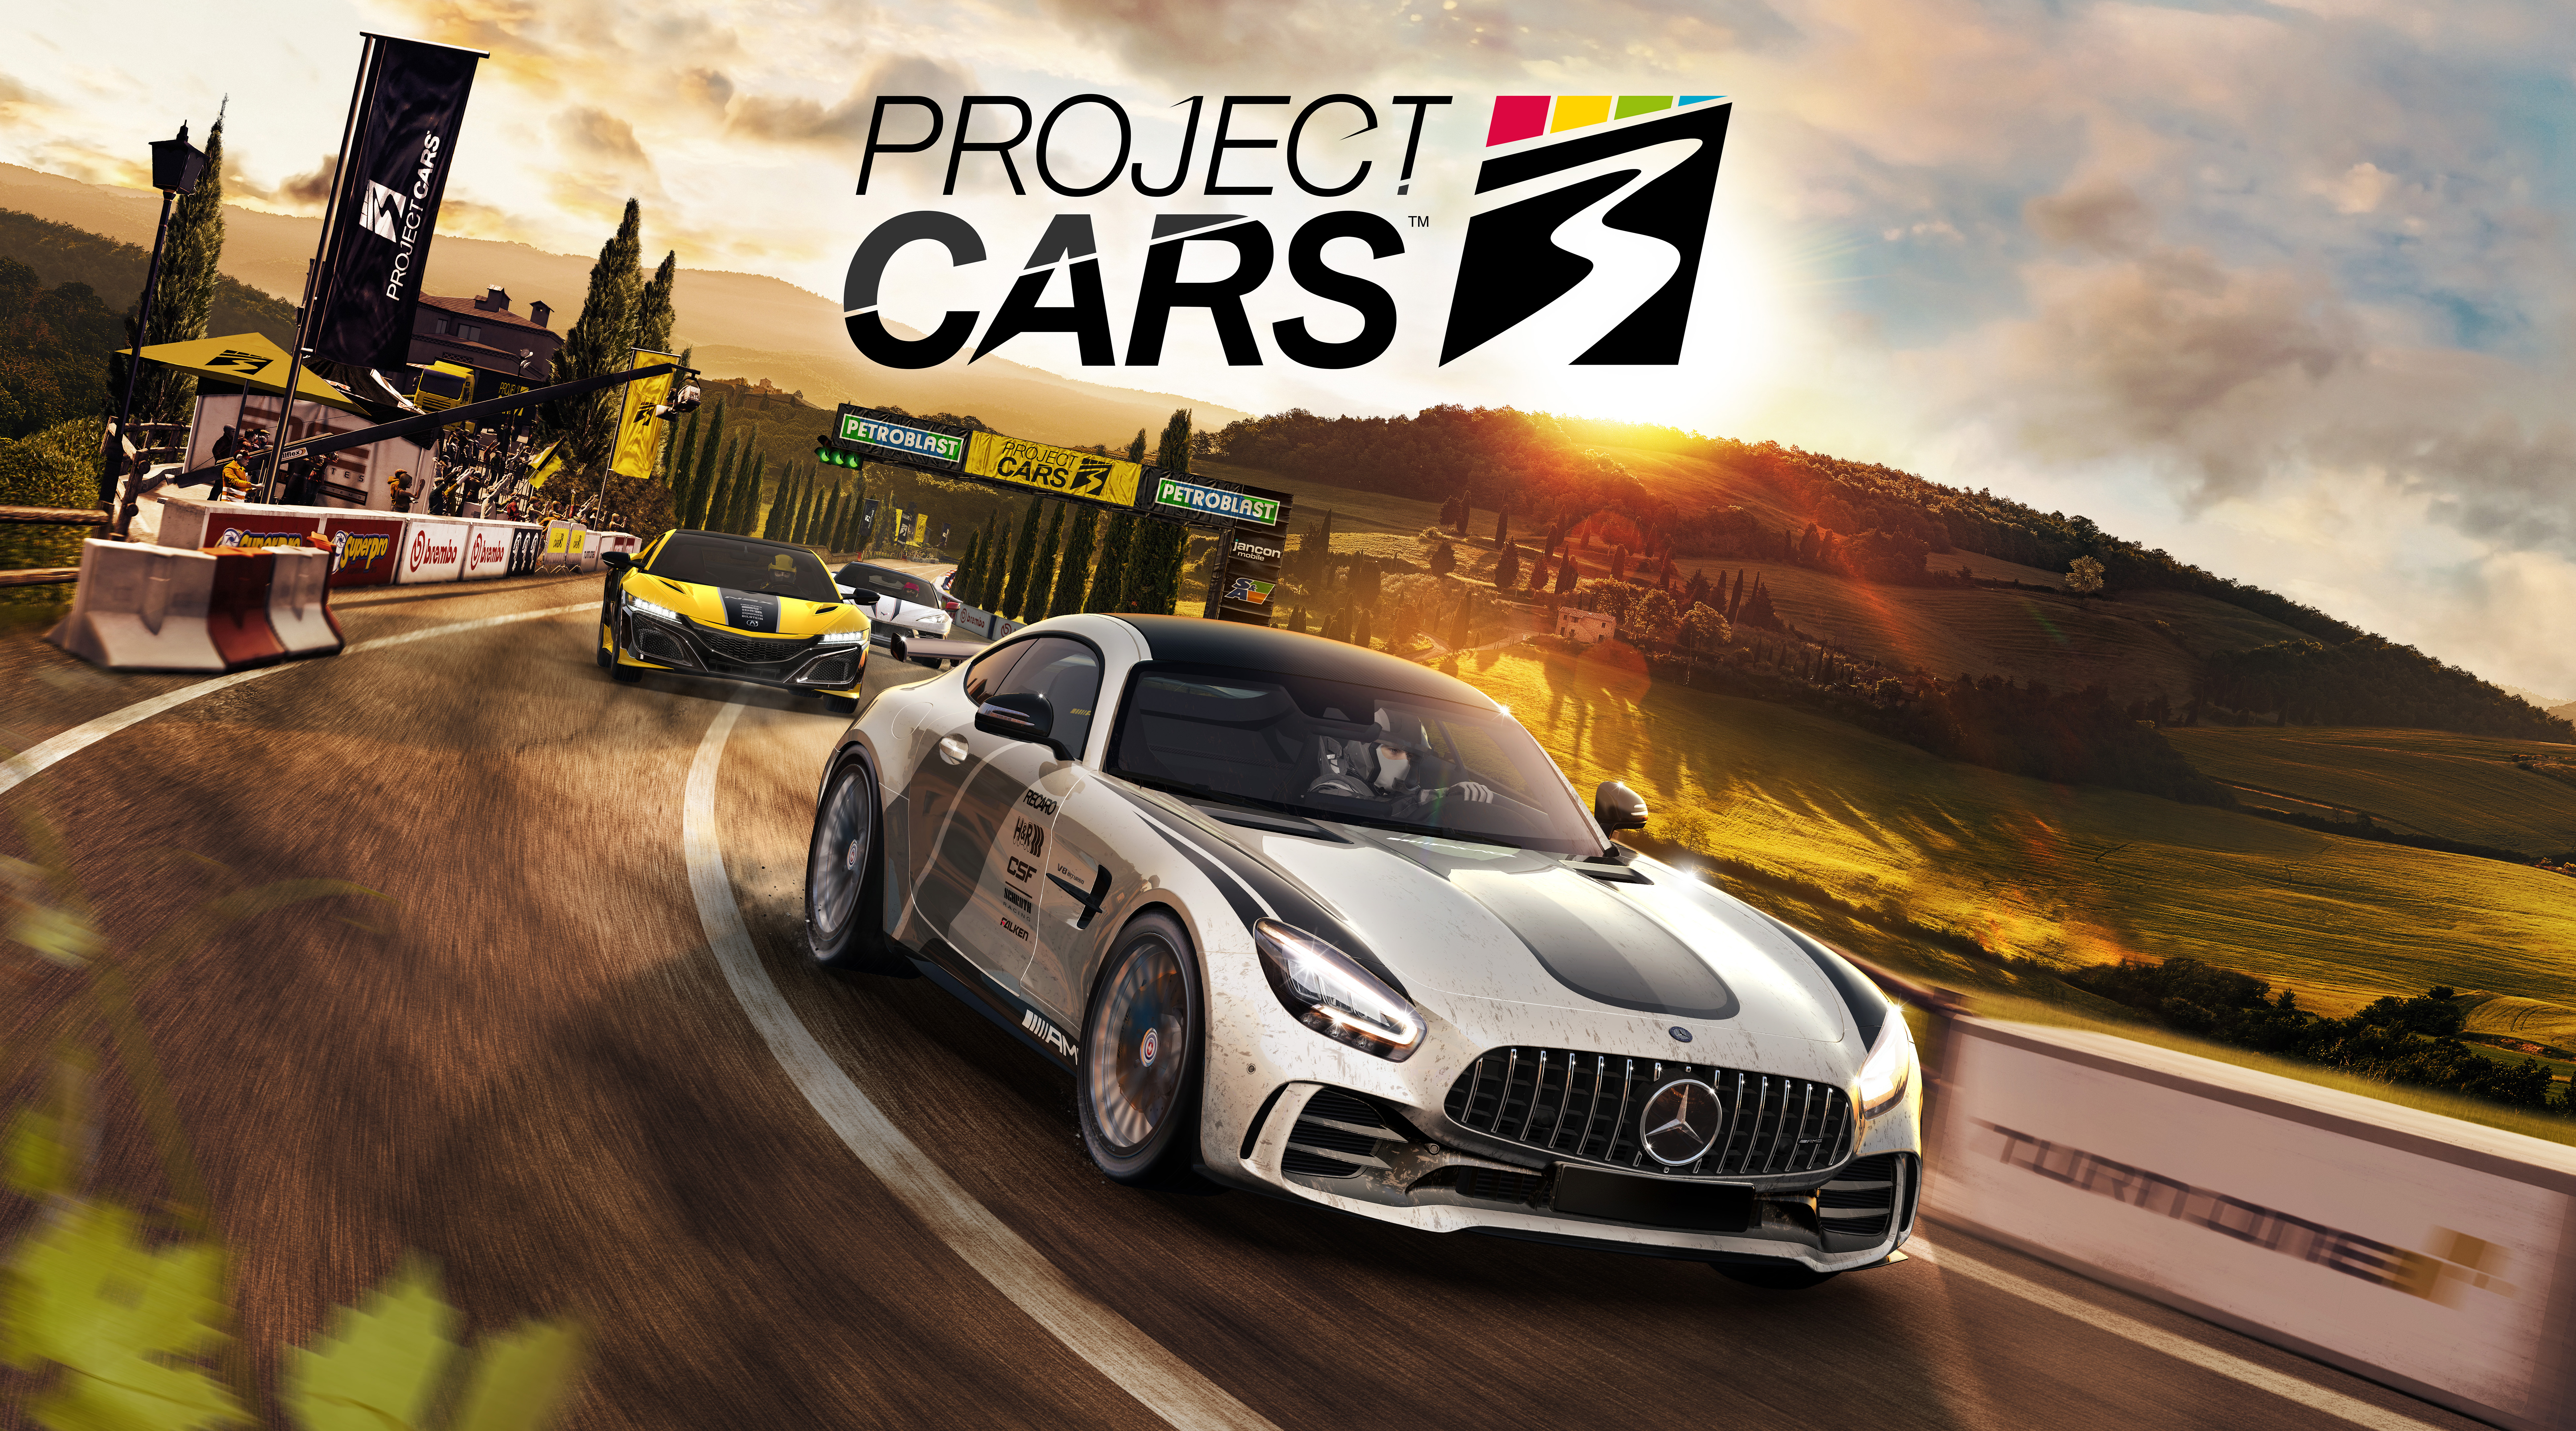 Project Cars 3 4k Wallpaper Mercedes Amg Gt R Pc Games Playstation 4 Xbox One 2020 Games 5k 8k Games 1629